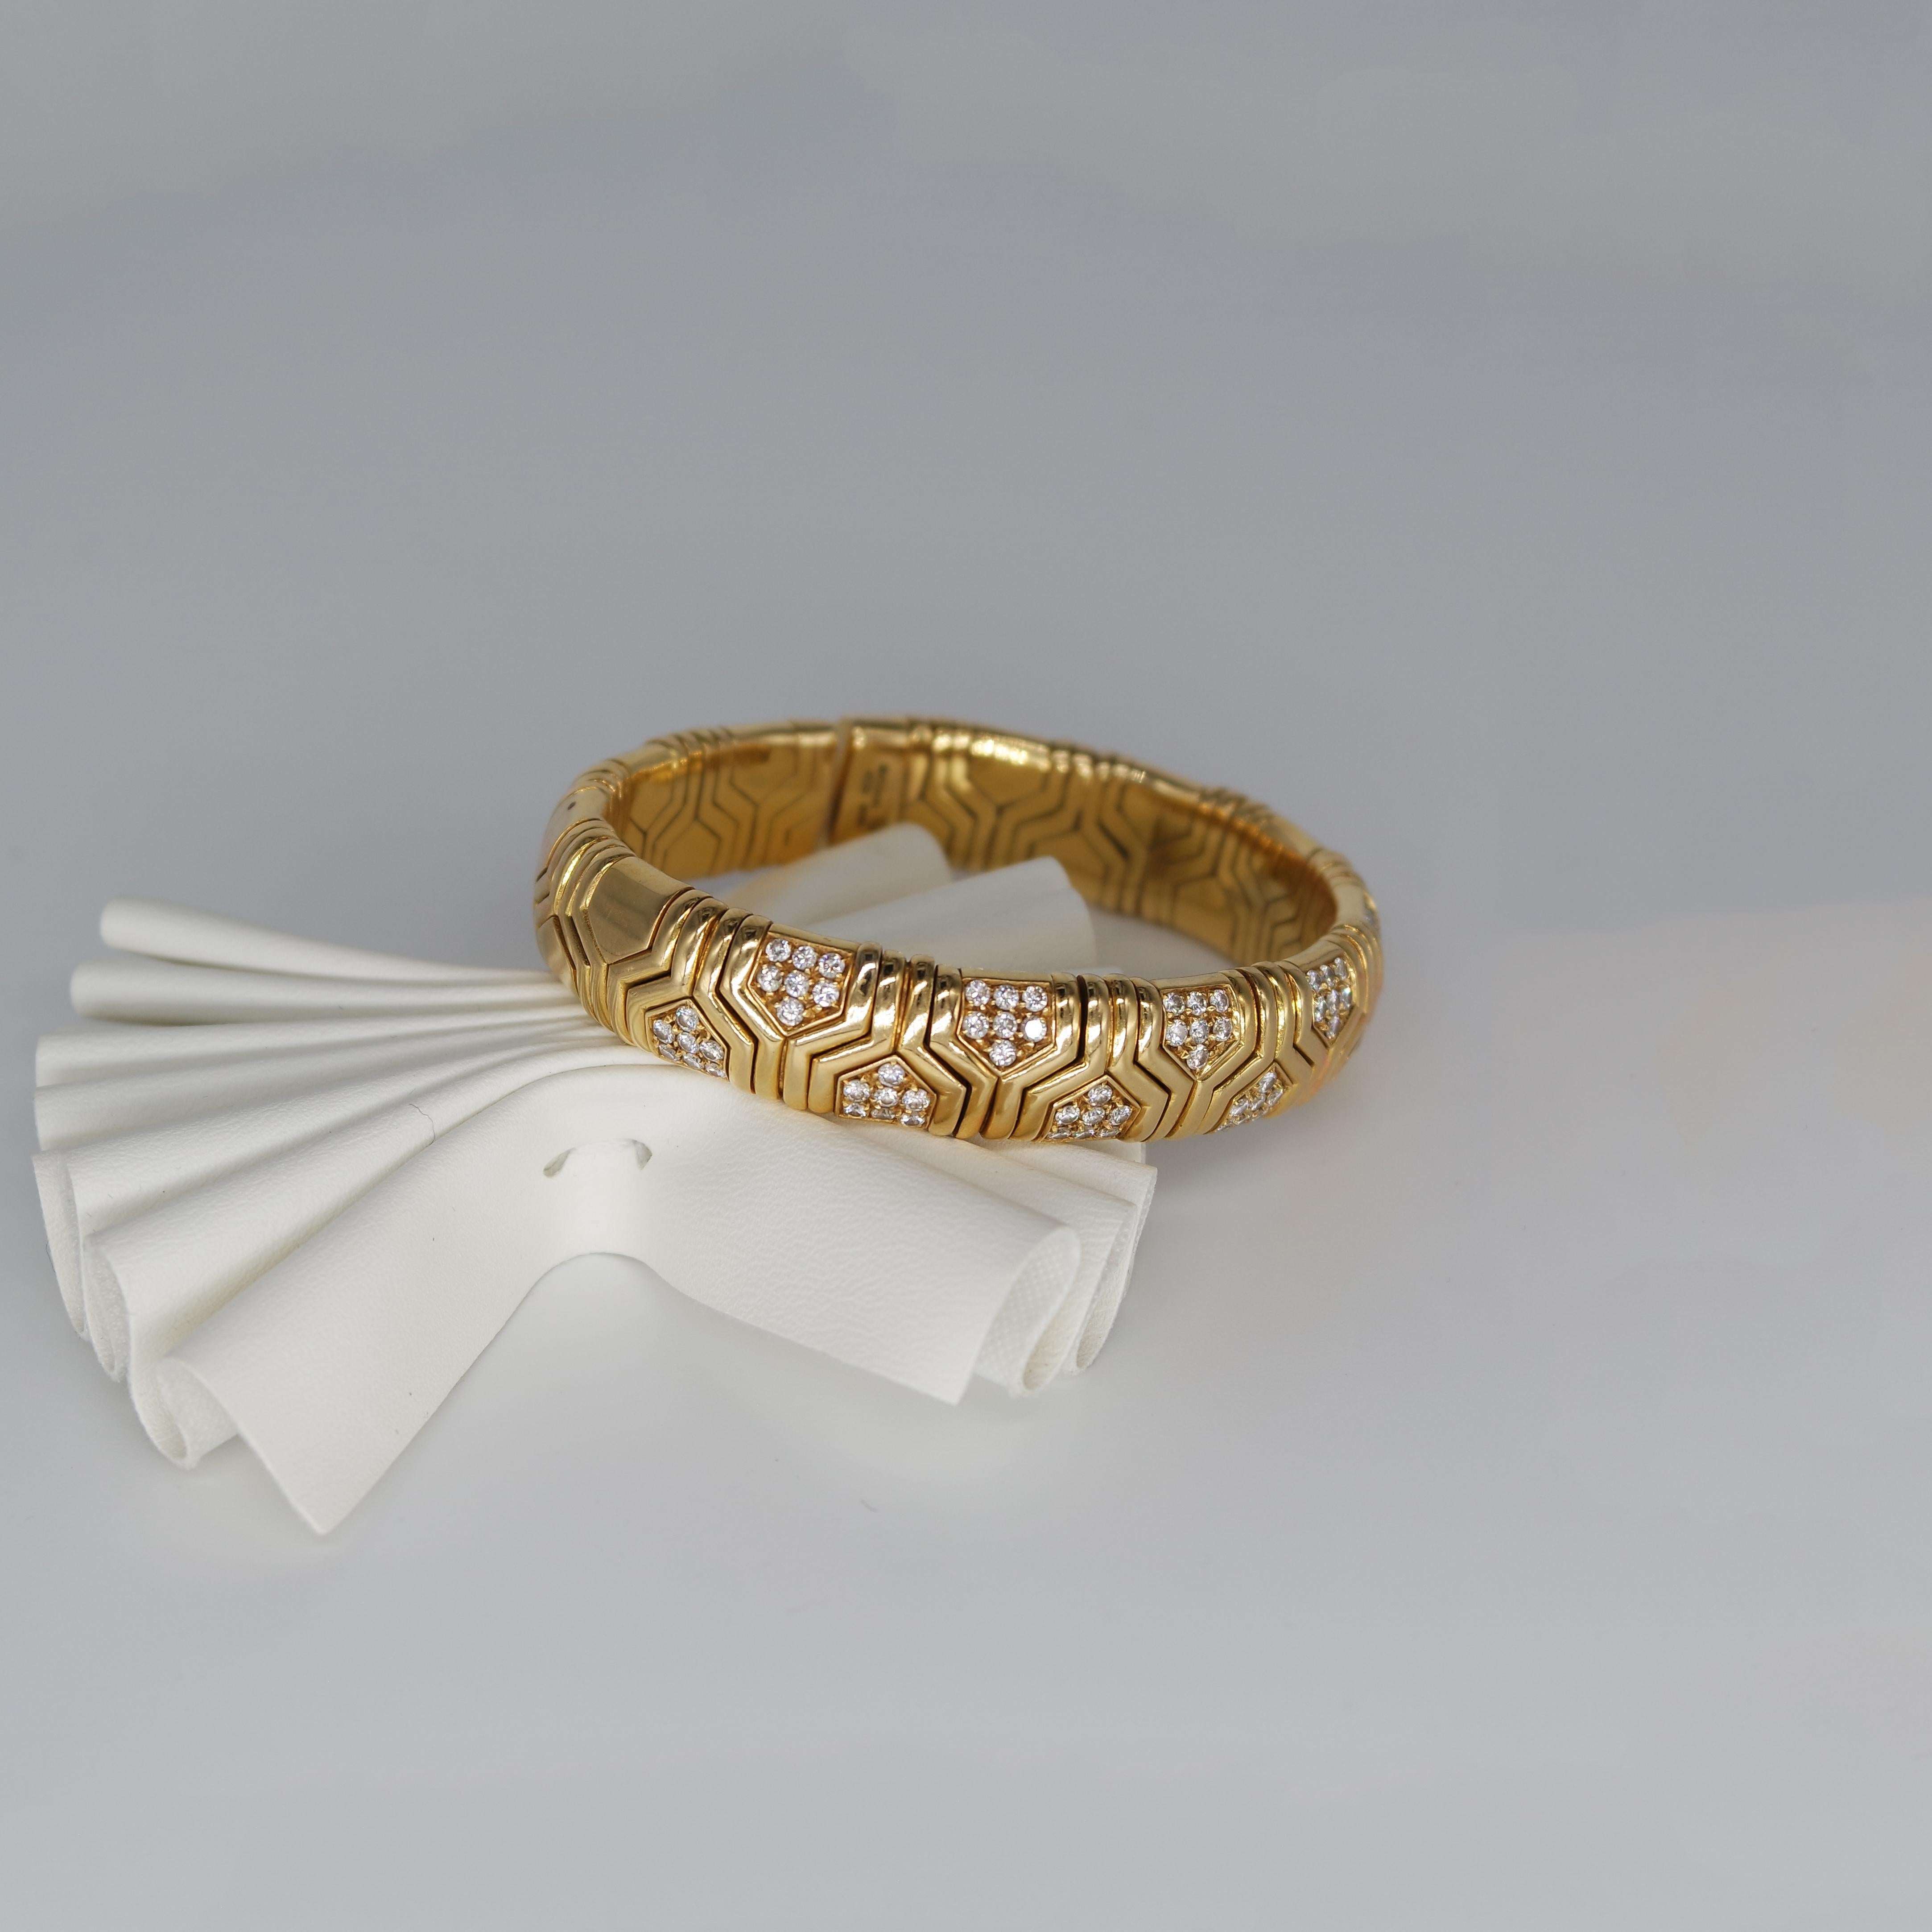 This exquisite authentic Bulgari bangle bracelet of immaculate design and artistic craftsmanship is of Italian provenance, crafted in solid 18K yellow gold, weighing app. 76 grams. Depicting delicate geometrical motives directly inspired by the